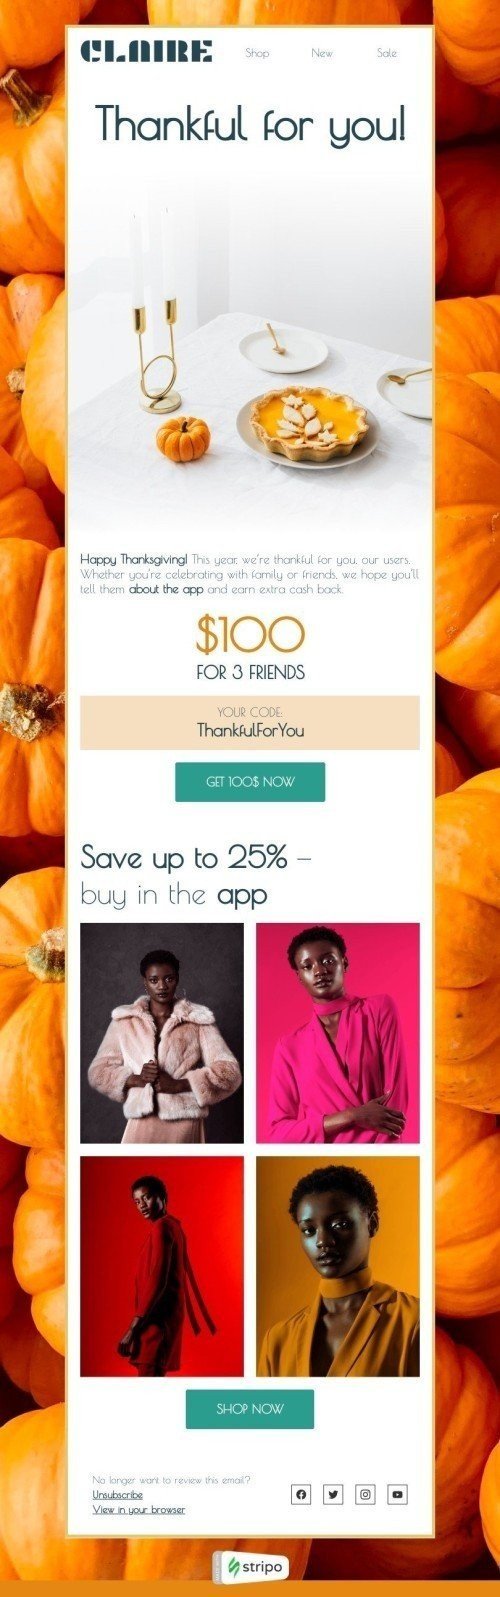 Thanksgiving Day Email Template "Thankful for you!" for Fashion industry mobile view